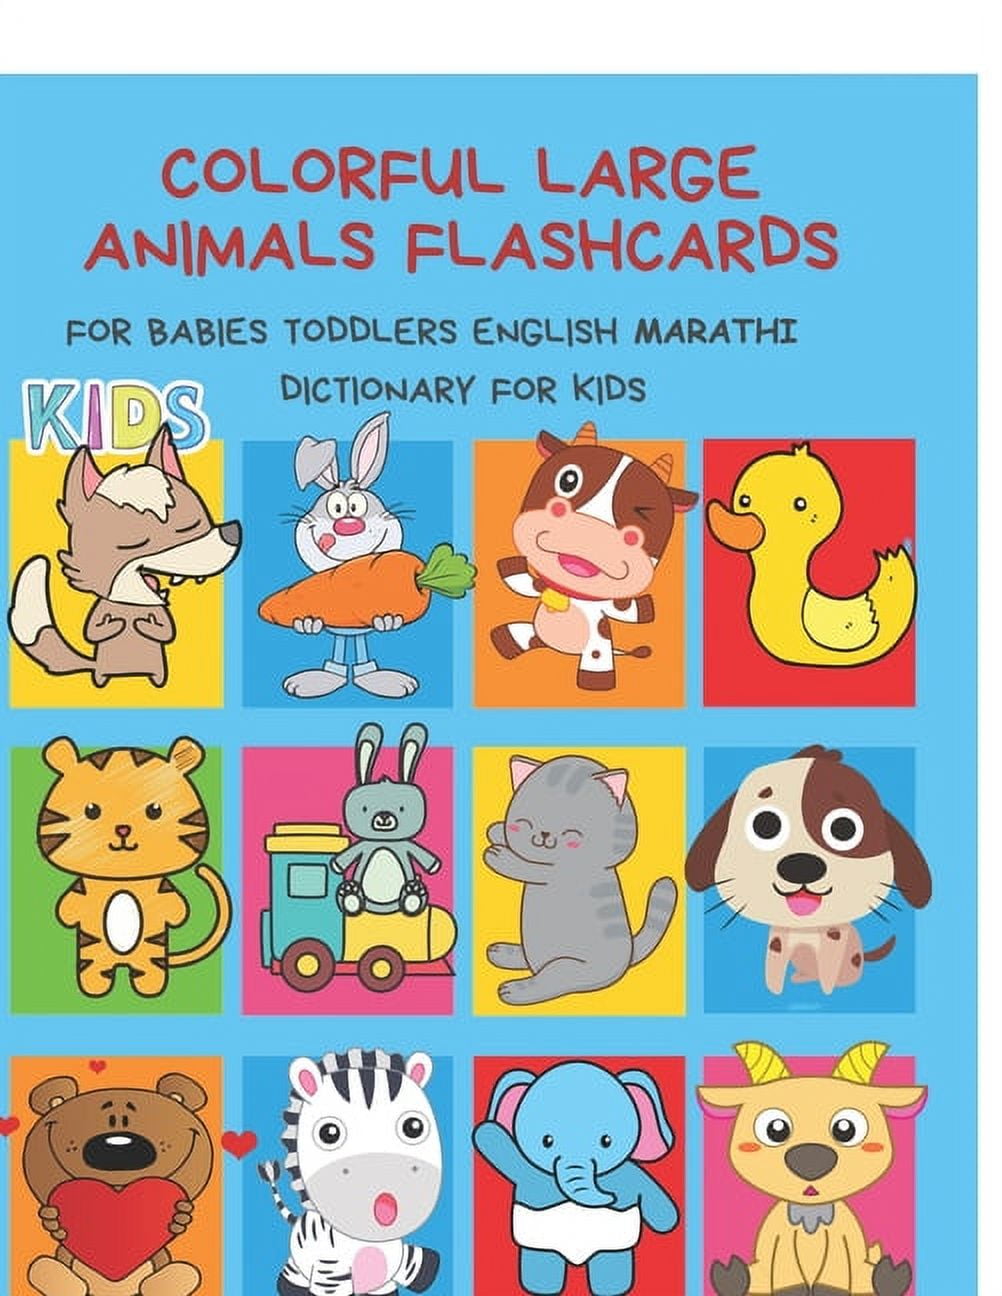 Colorful Large Animals Flashcards Babies Toddlers English Marathi Dictionary Kids My baby first basic words flash cards learning resources jumbo farm ae2b7976 d717 402b a91b bbeb619fdb7f.4099a2c74f4ddad80f192887d22dd552